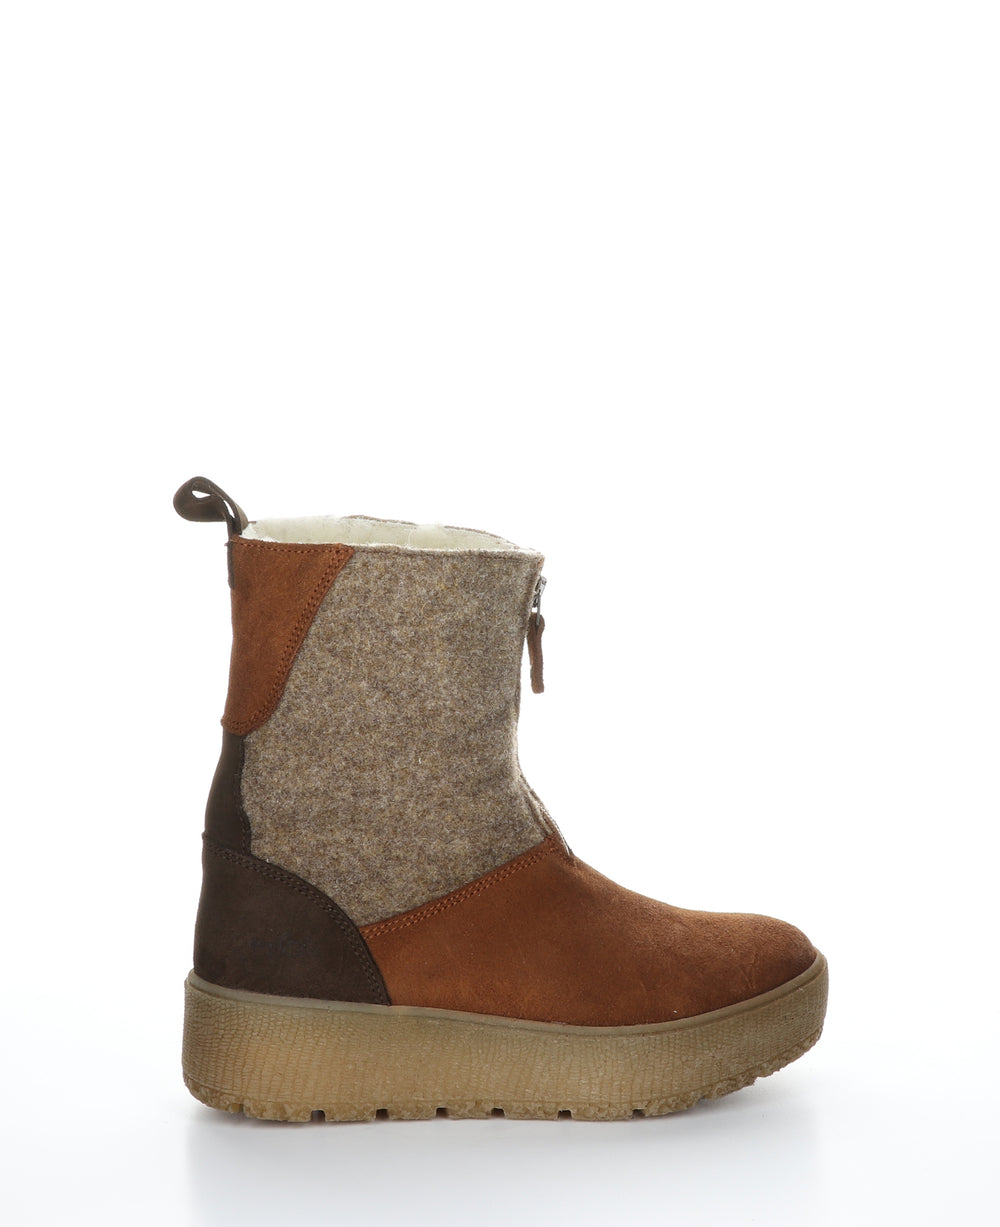 IGNITE Whisky/Beige/Coffee Zip Up Boots